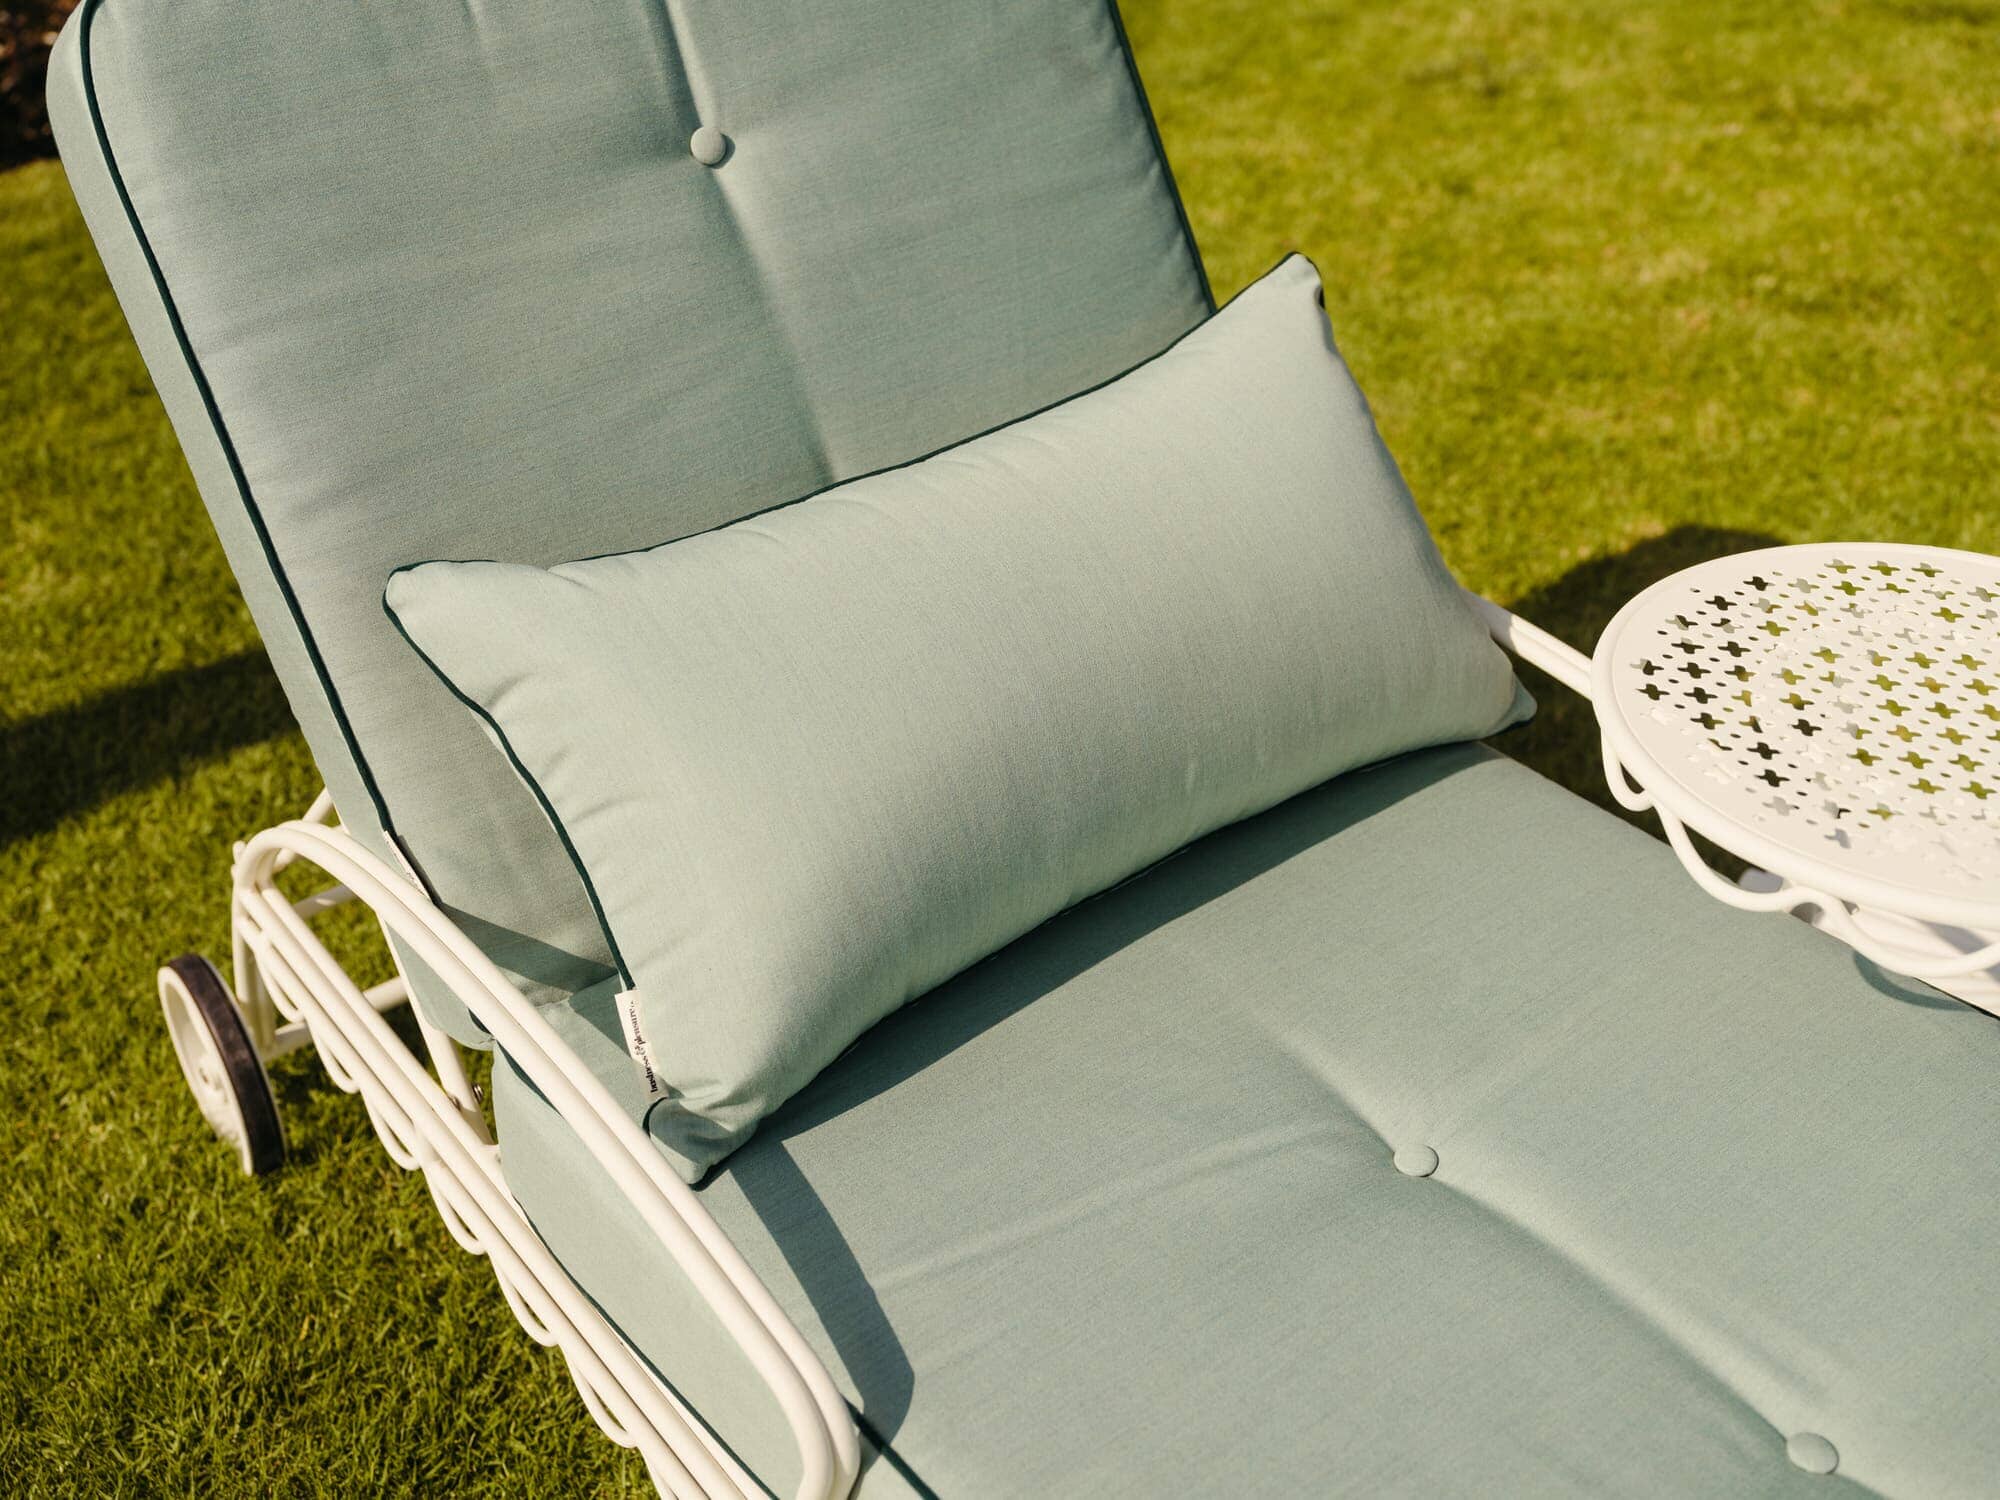 Riviera throw pillow on a sun lounger in the sun